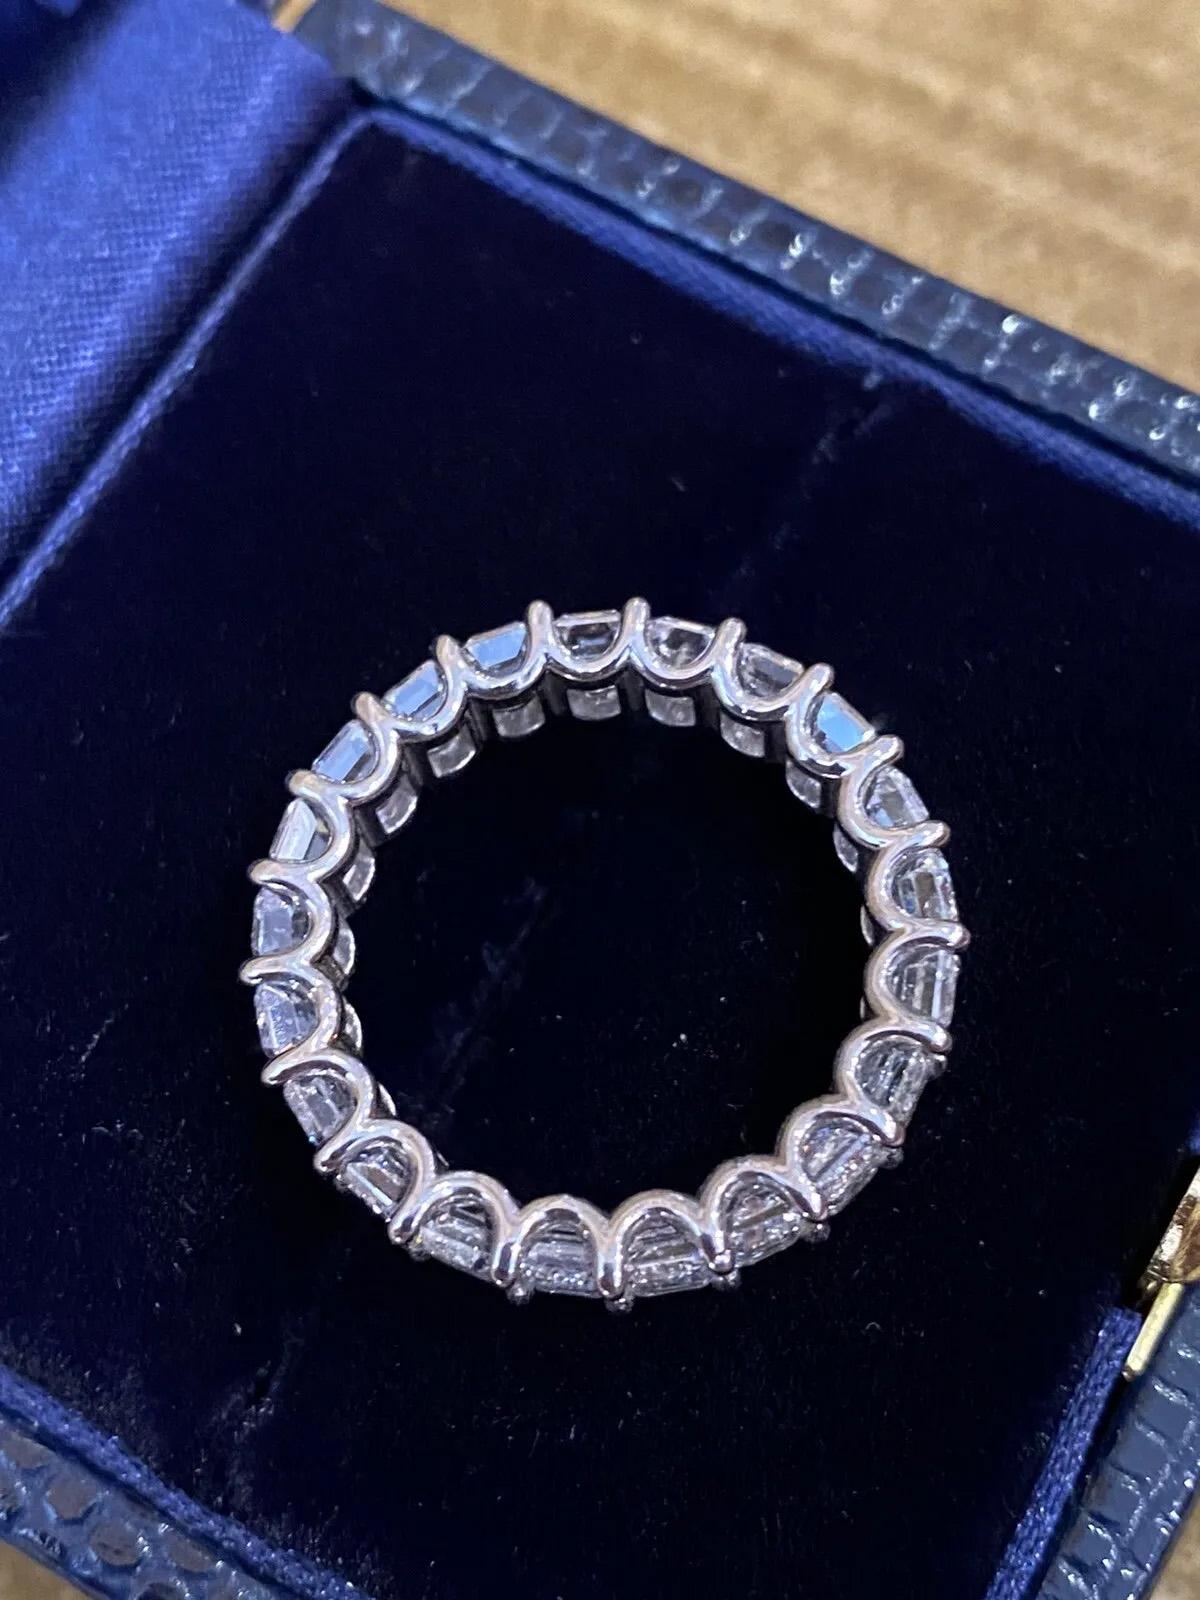 5.12 Carat Total Emerald Cut Diamond Eternity Band Ring in Platinum 5mm 6.25 In Excellent Condition For Sale In La Jolla, CA